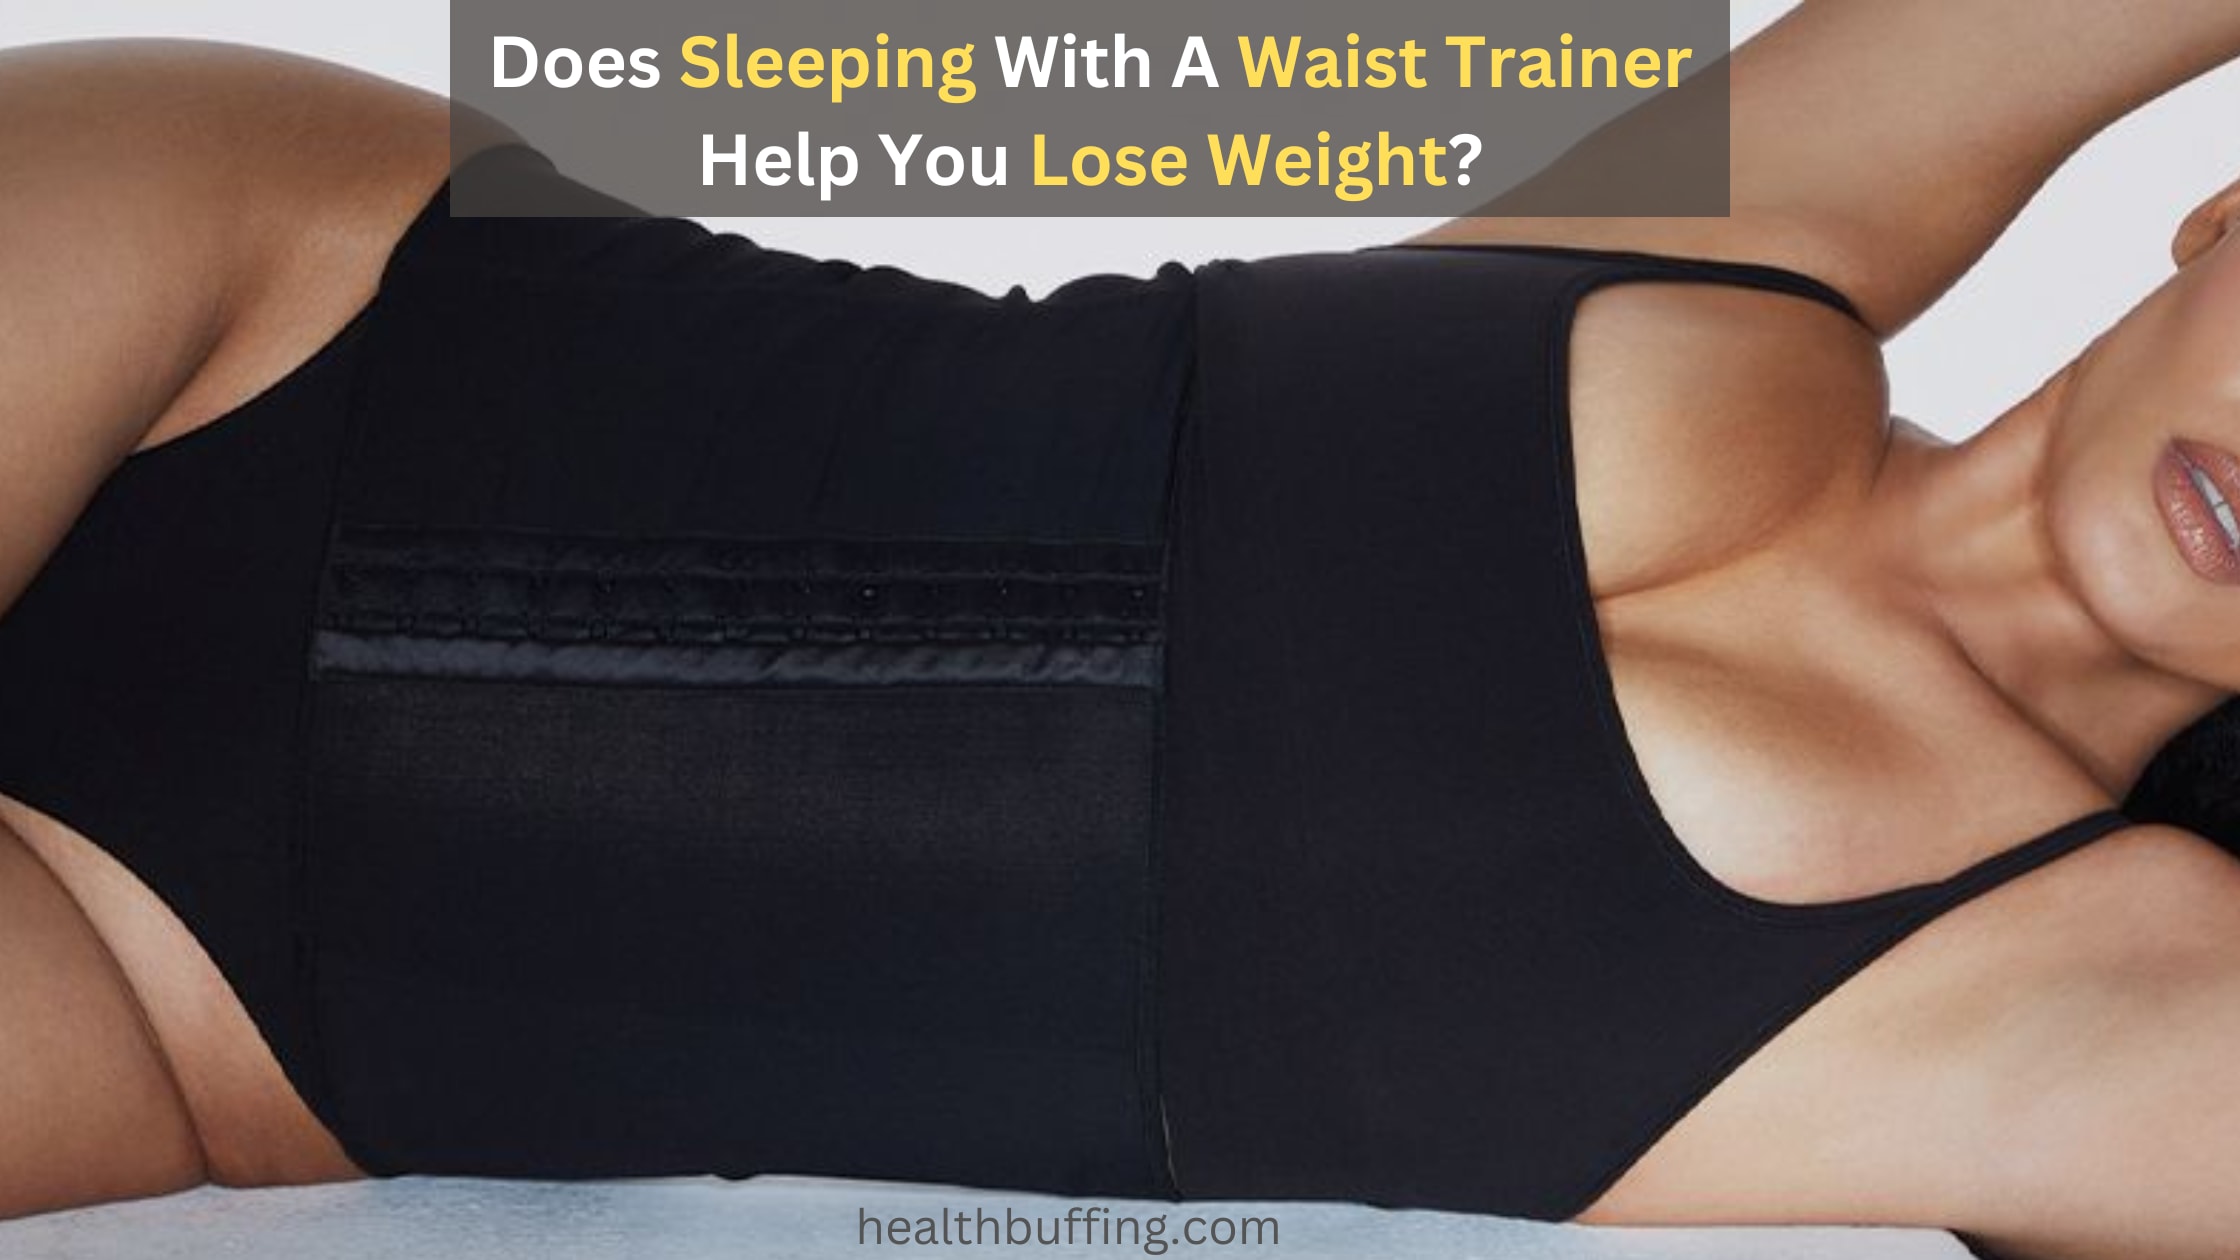 Make sure we are sleeping in our waist erasers! Burn calories